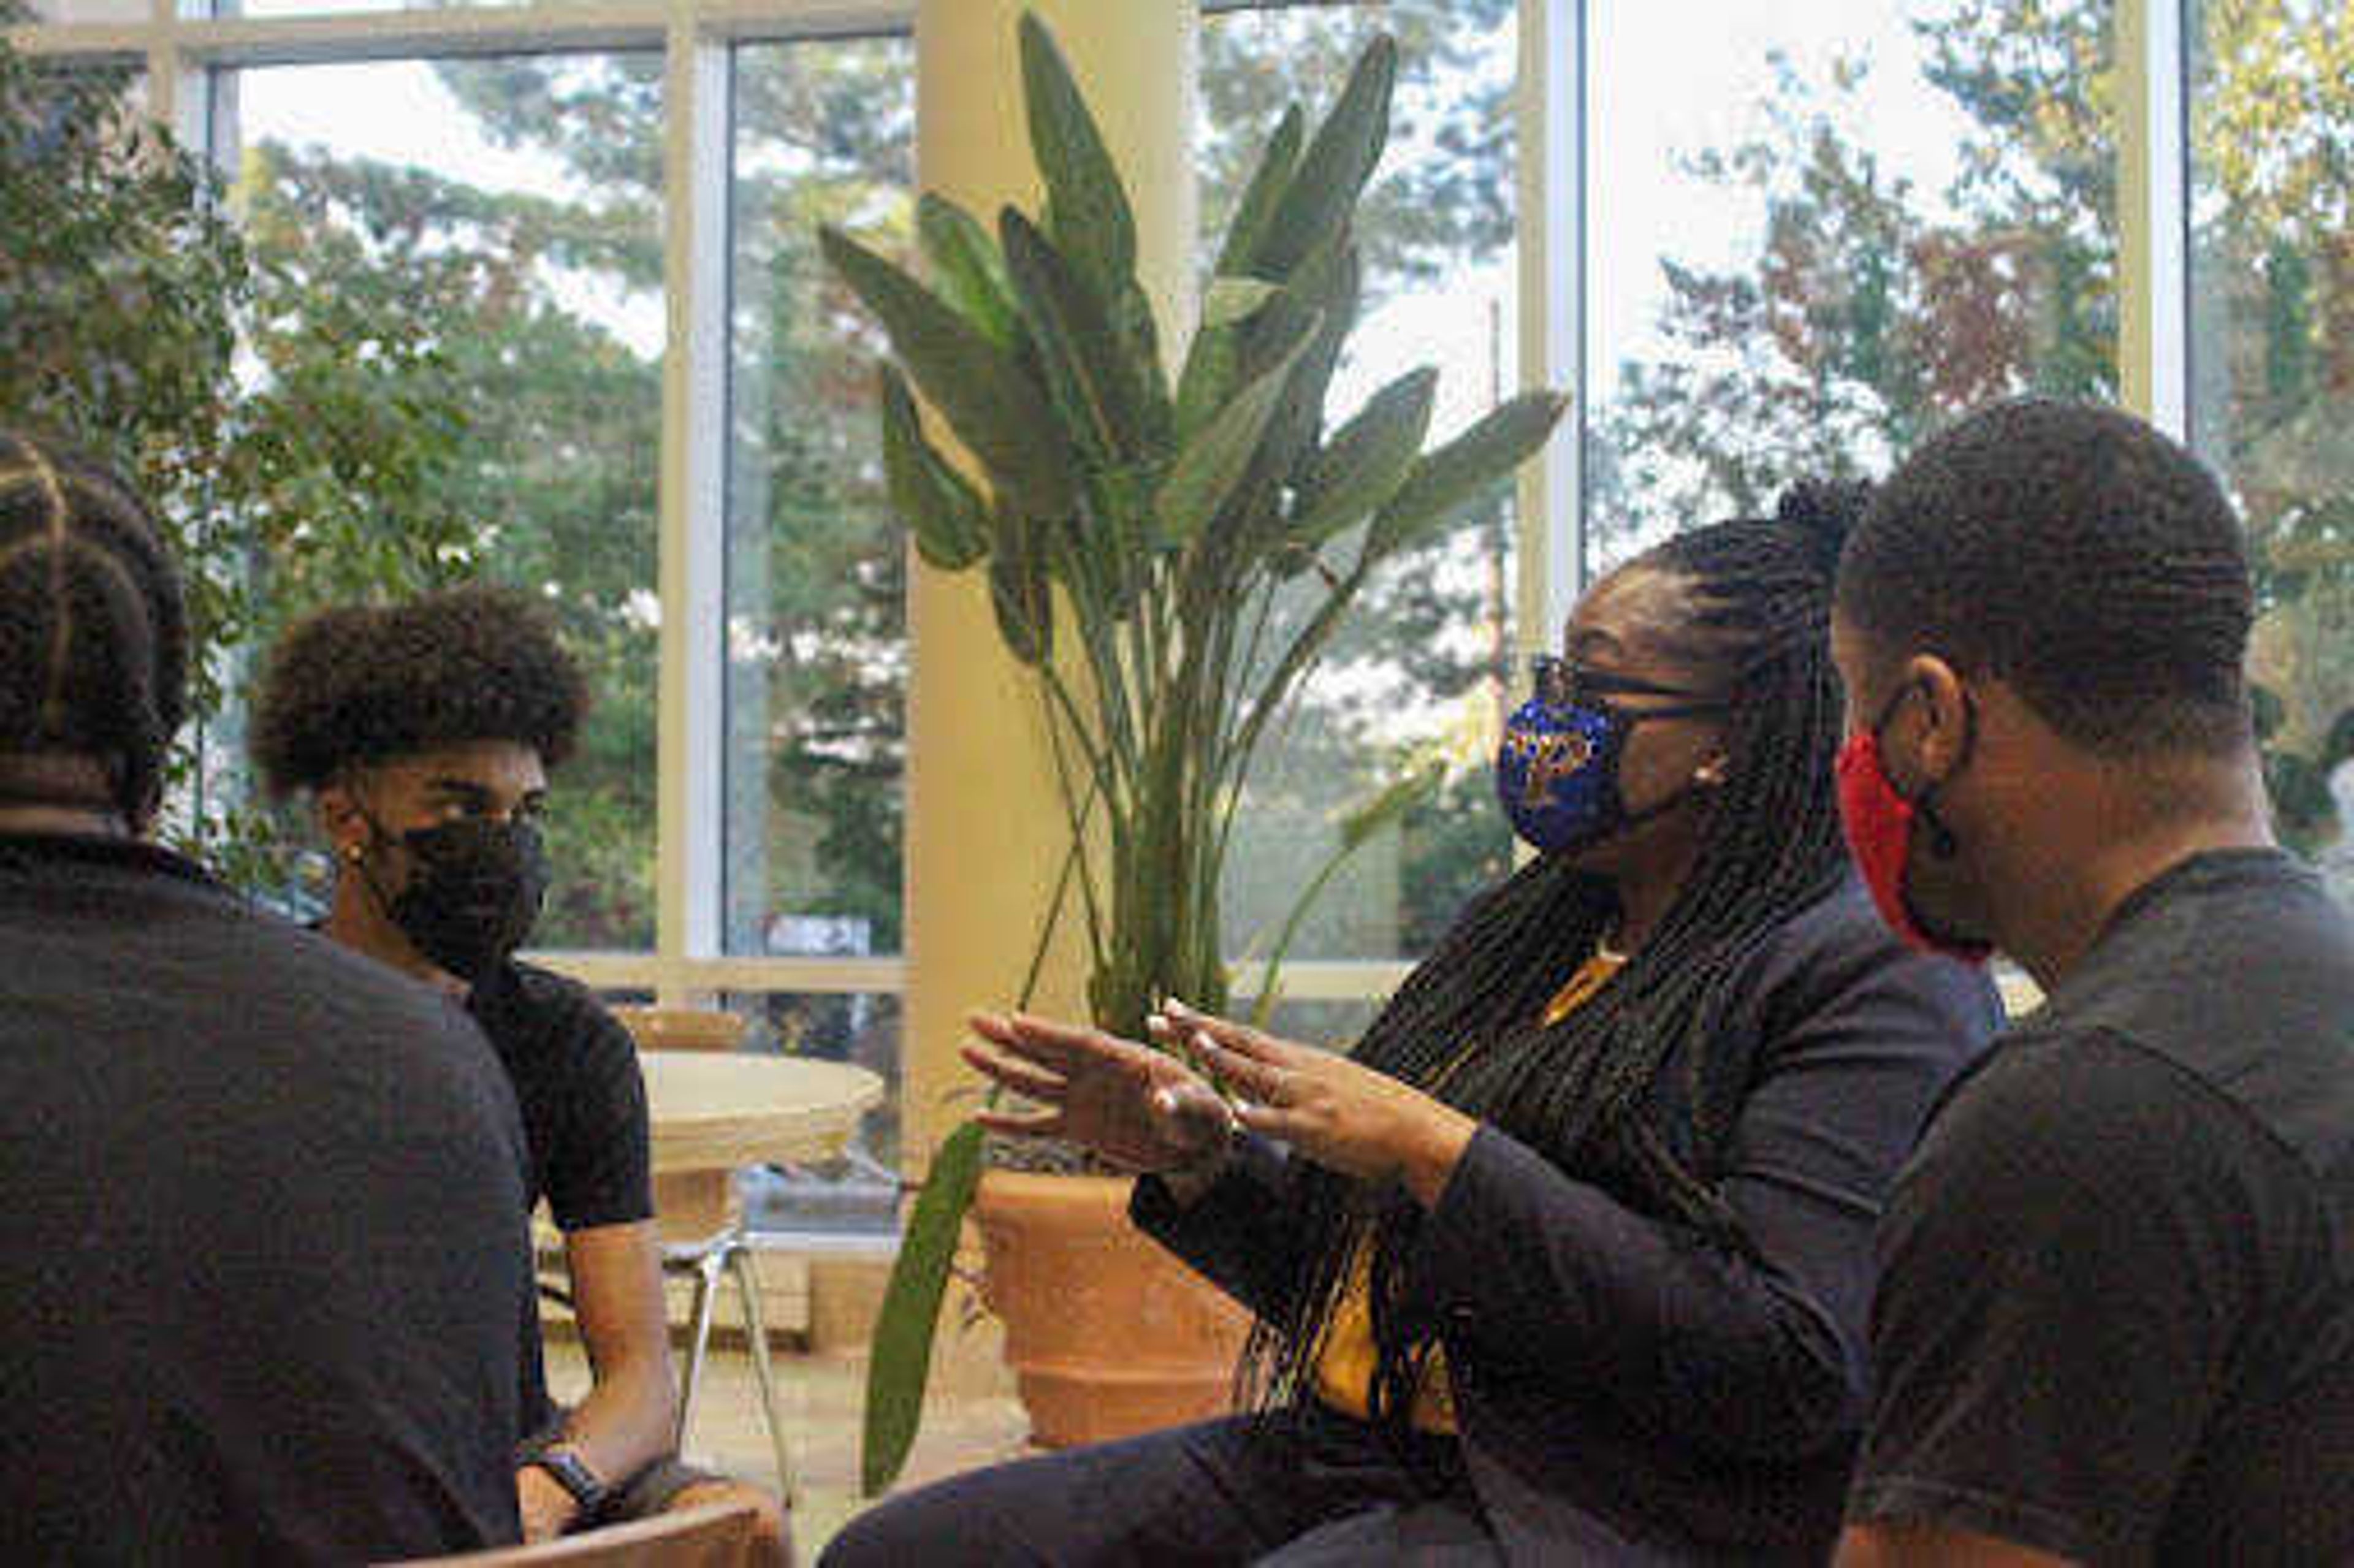 Director of Learning Assistance Programs WyKeshia Atkins advises freshman Ian Billiot (left) and sophomore Christen Griffin at the Black Faculty and Staff Meet and Greet. Billiot, who said he is an advocate for mental health, connected with a campus counselor at the event.